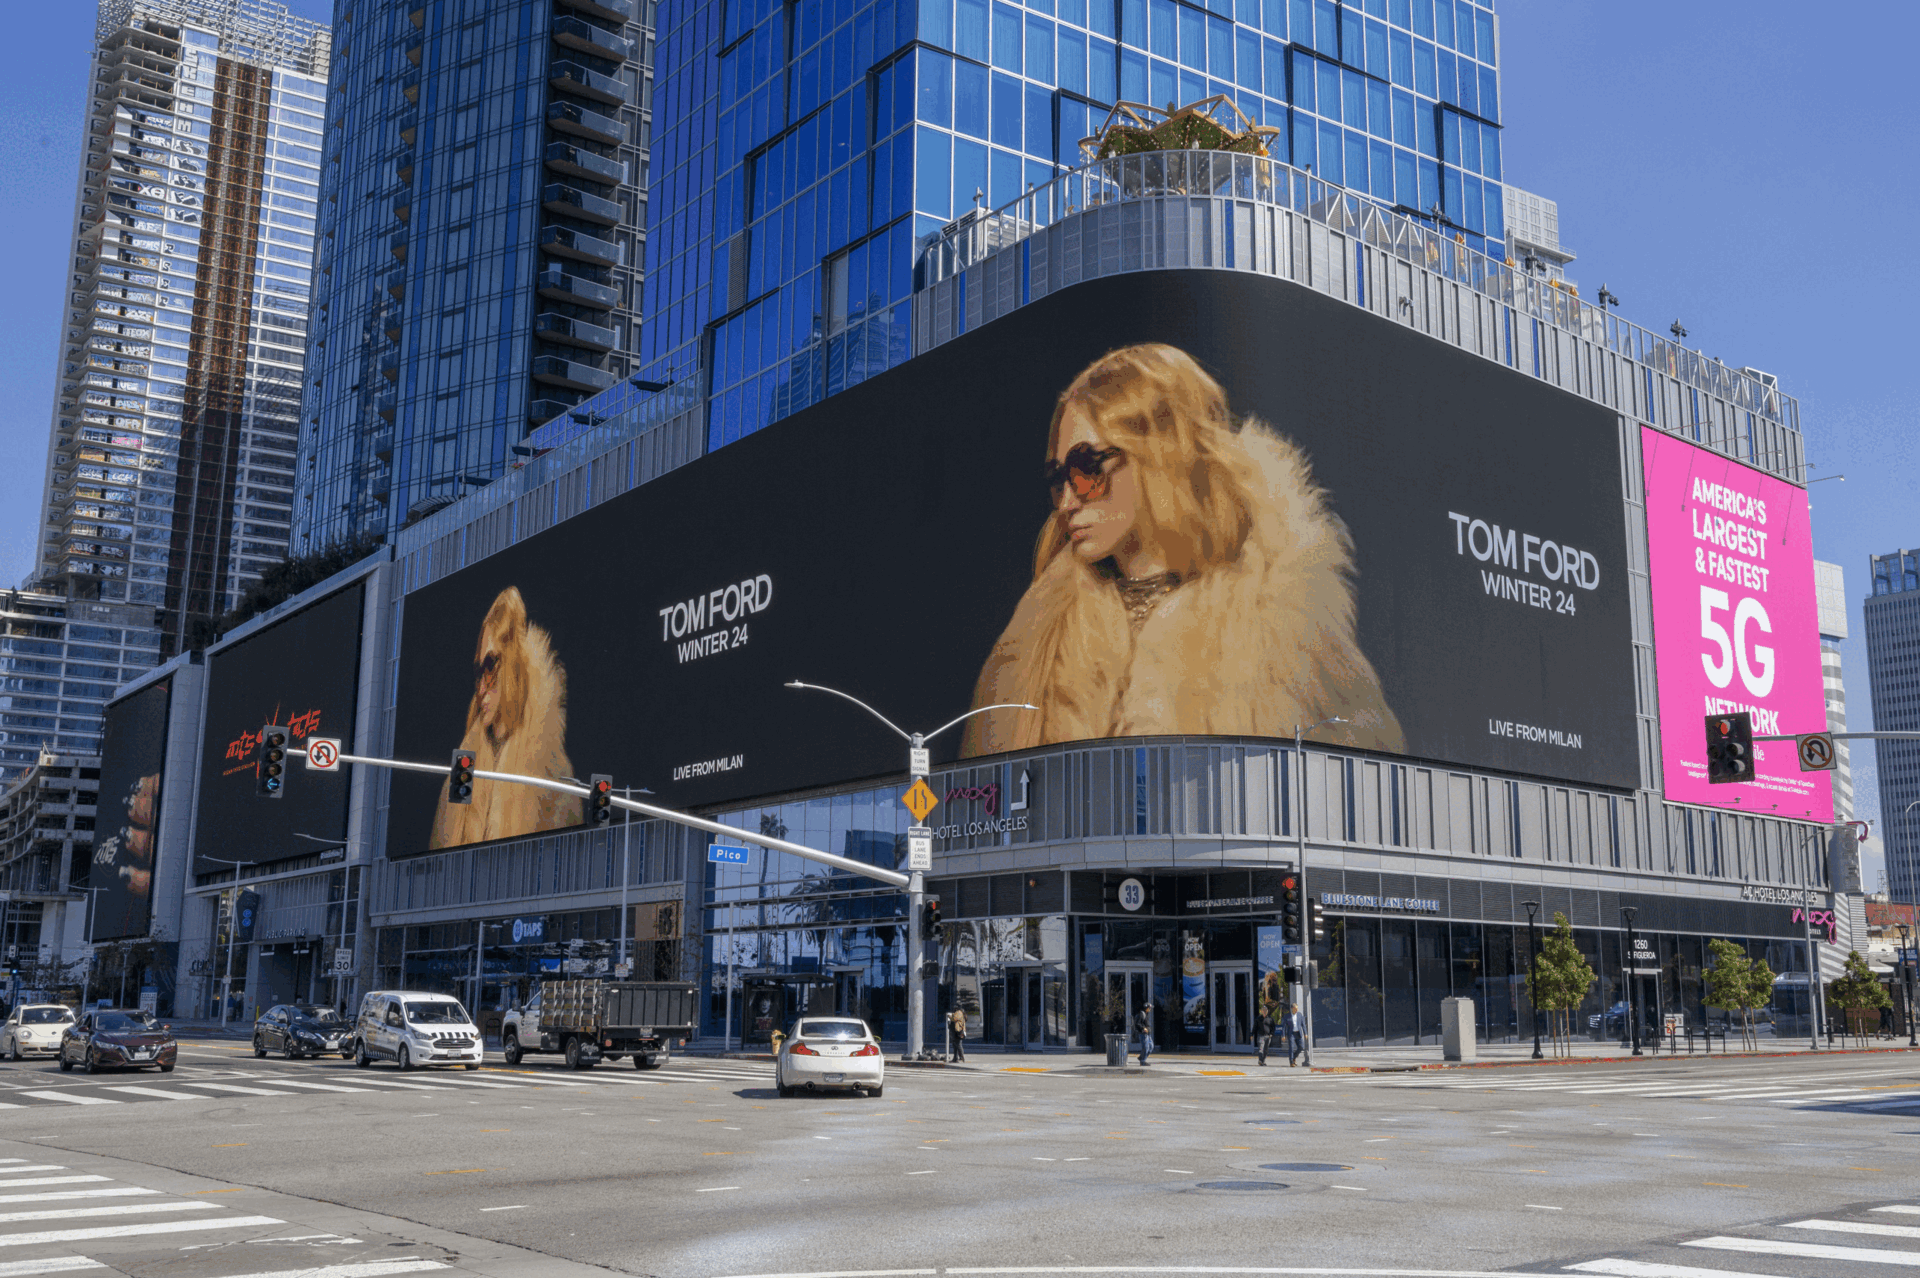 Tom Ford takes over worlds most iconic OOH screens with transatlantic live stream